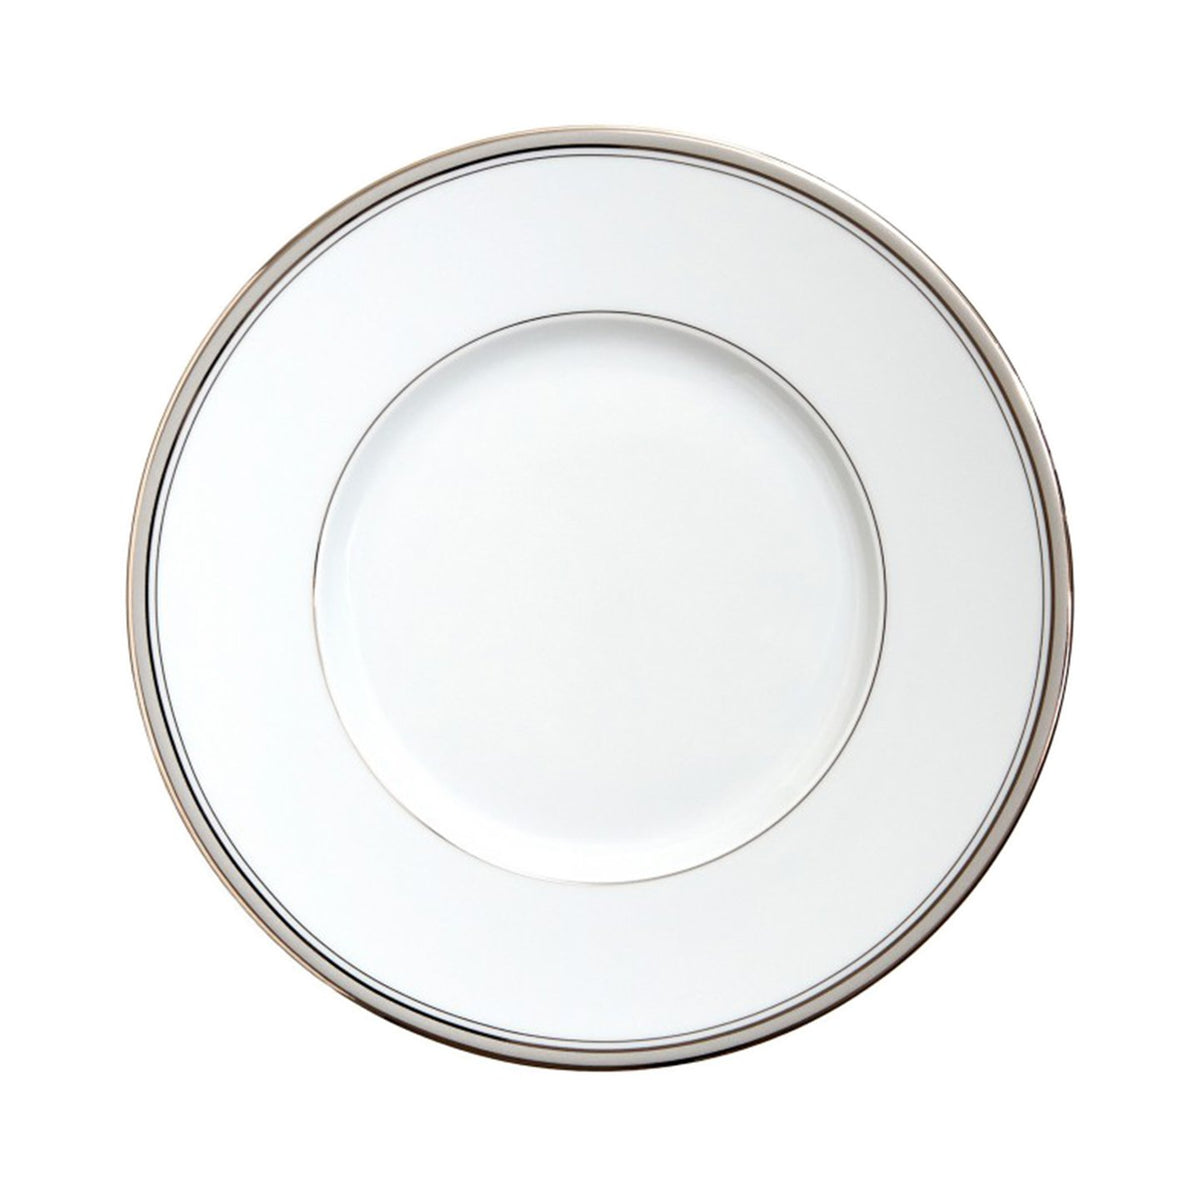 Excellence Grey Dinner Plate